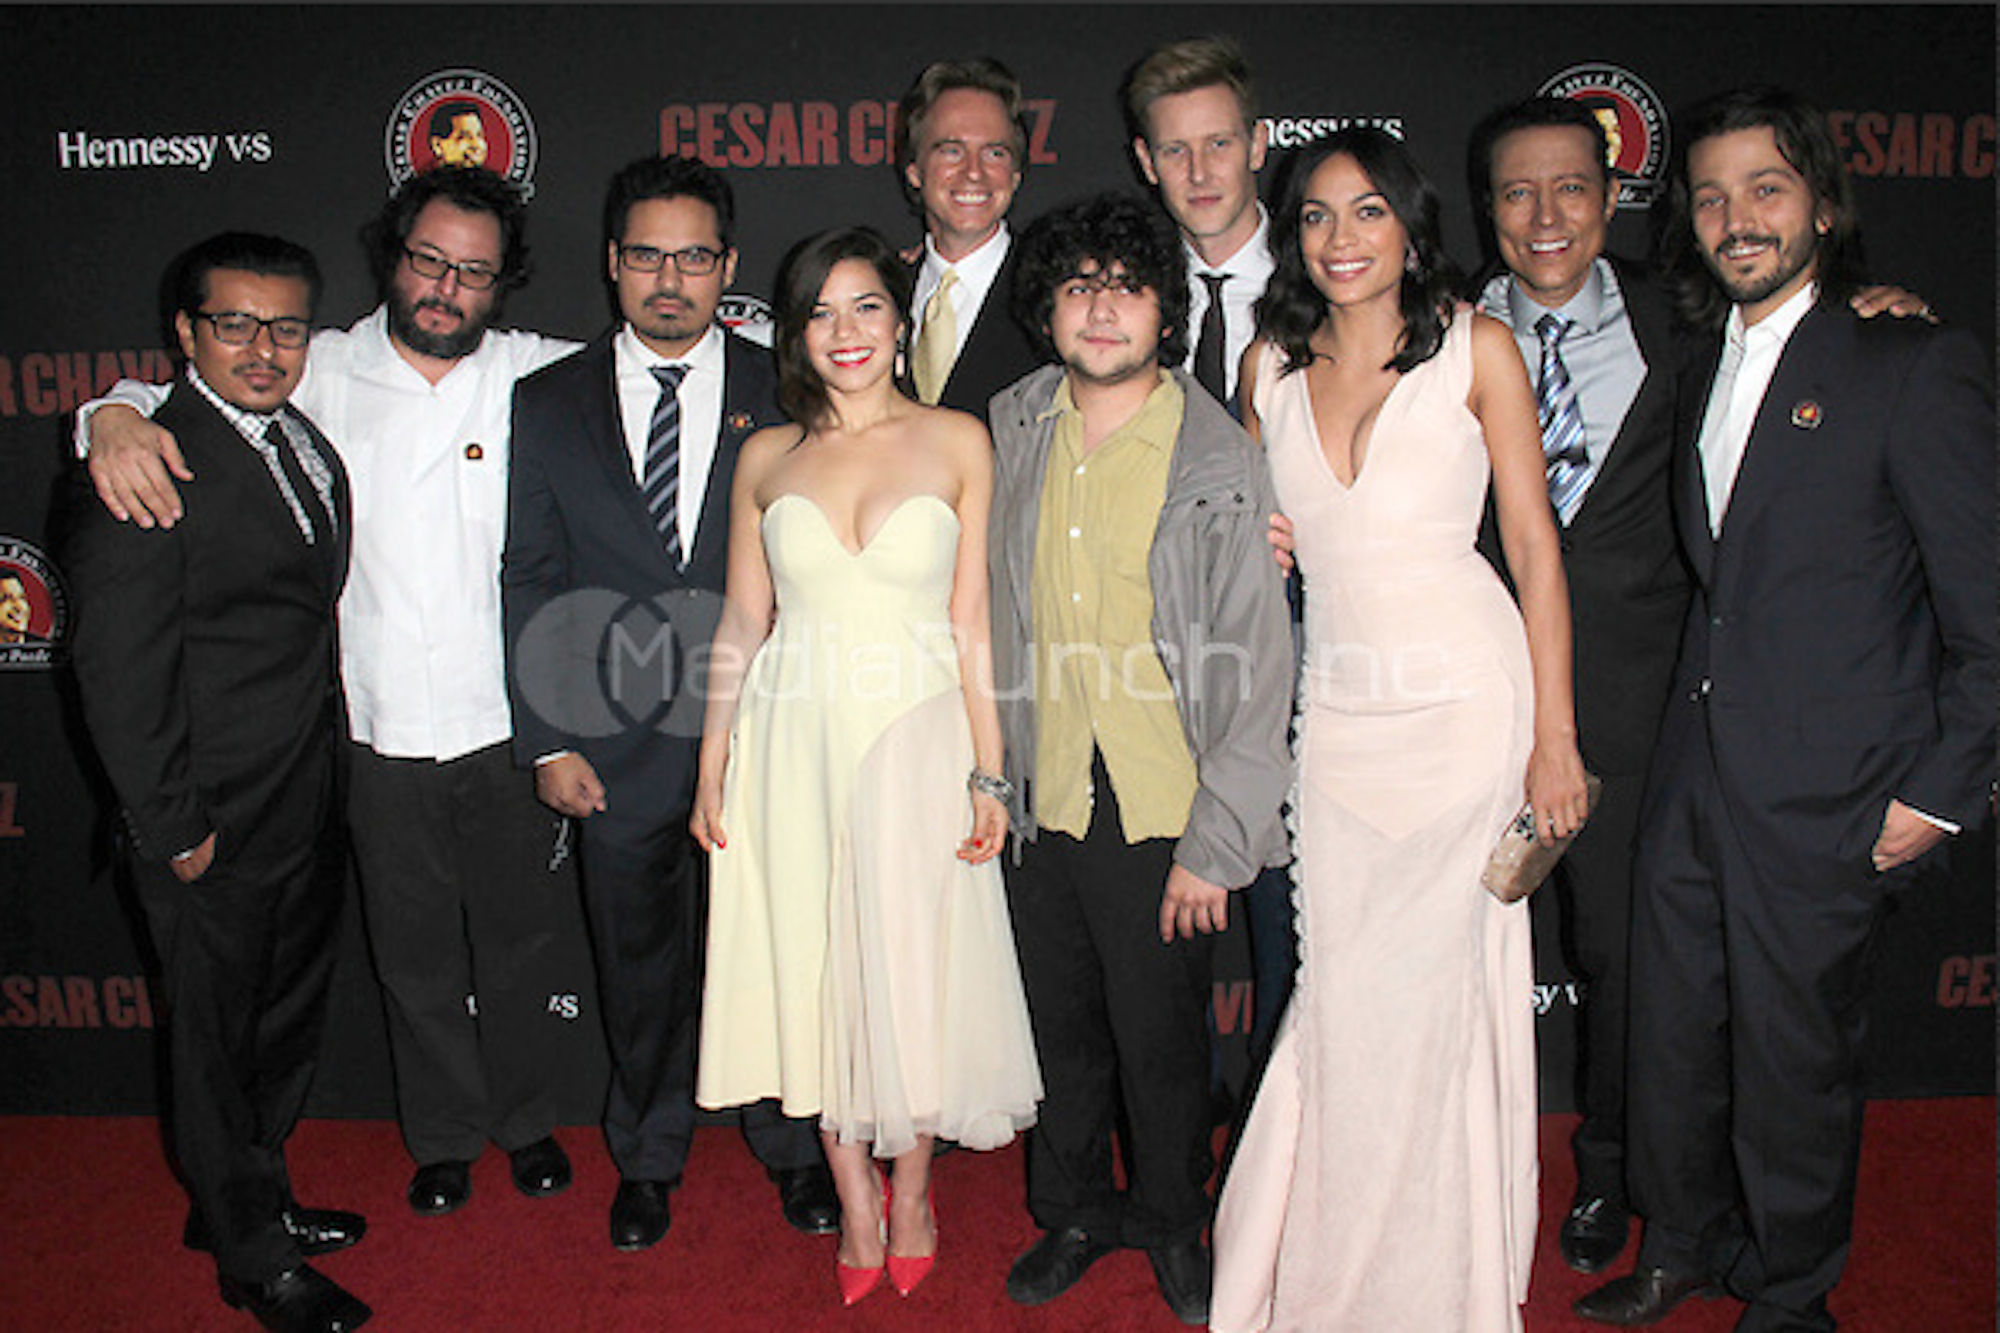 Jack Holmes with Cesar Chavez cast on the red carpet at the premiere on March 20, 2014.